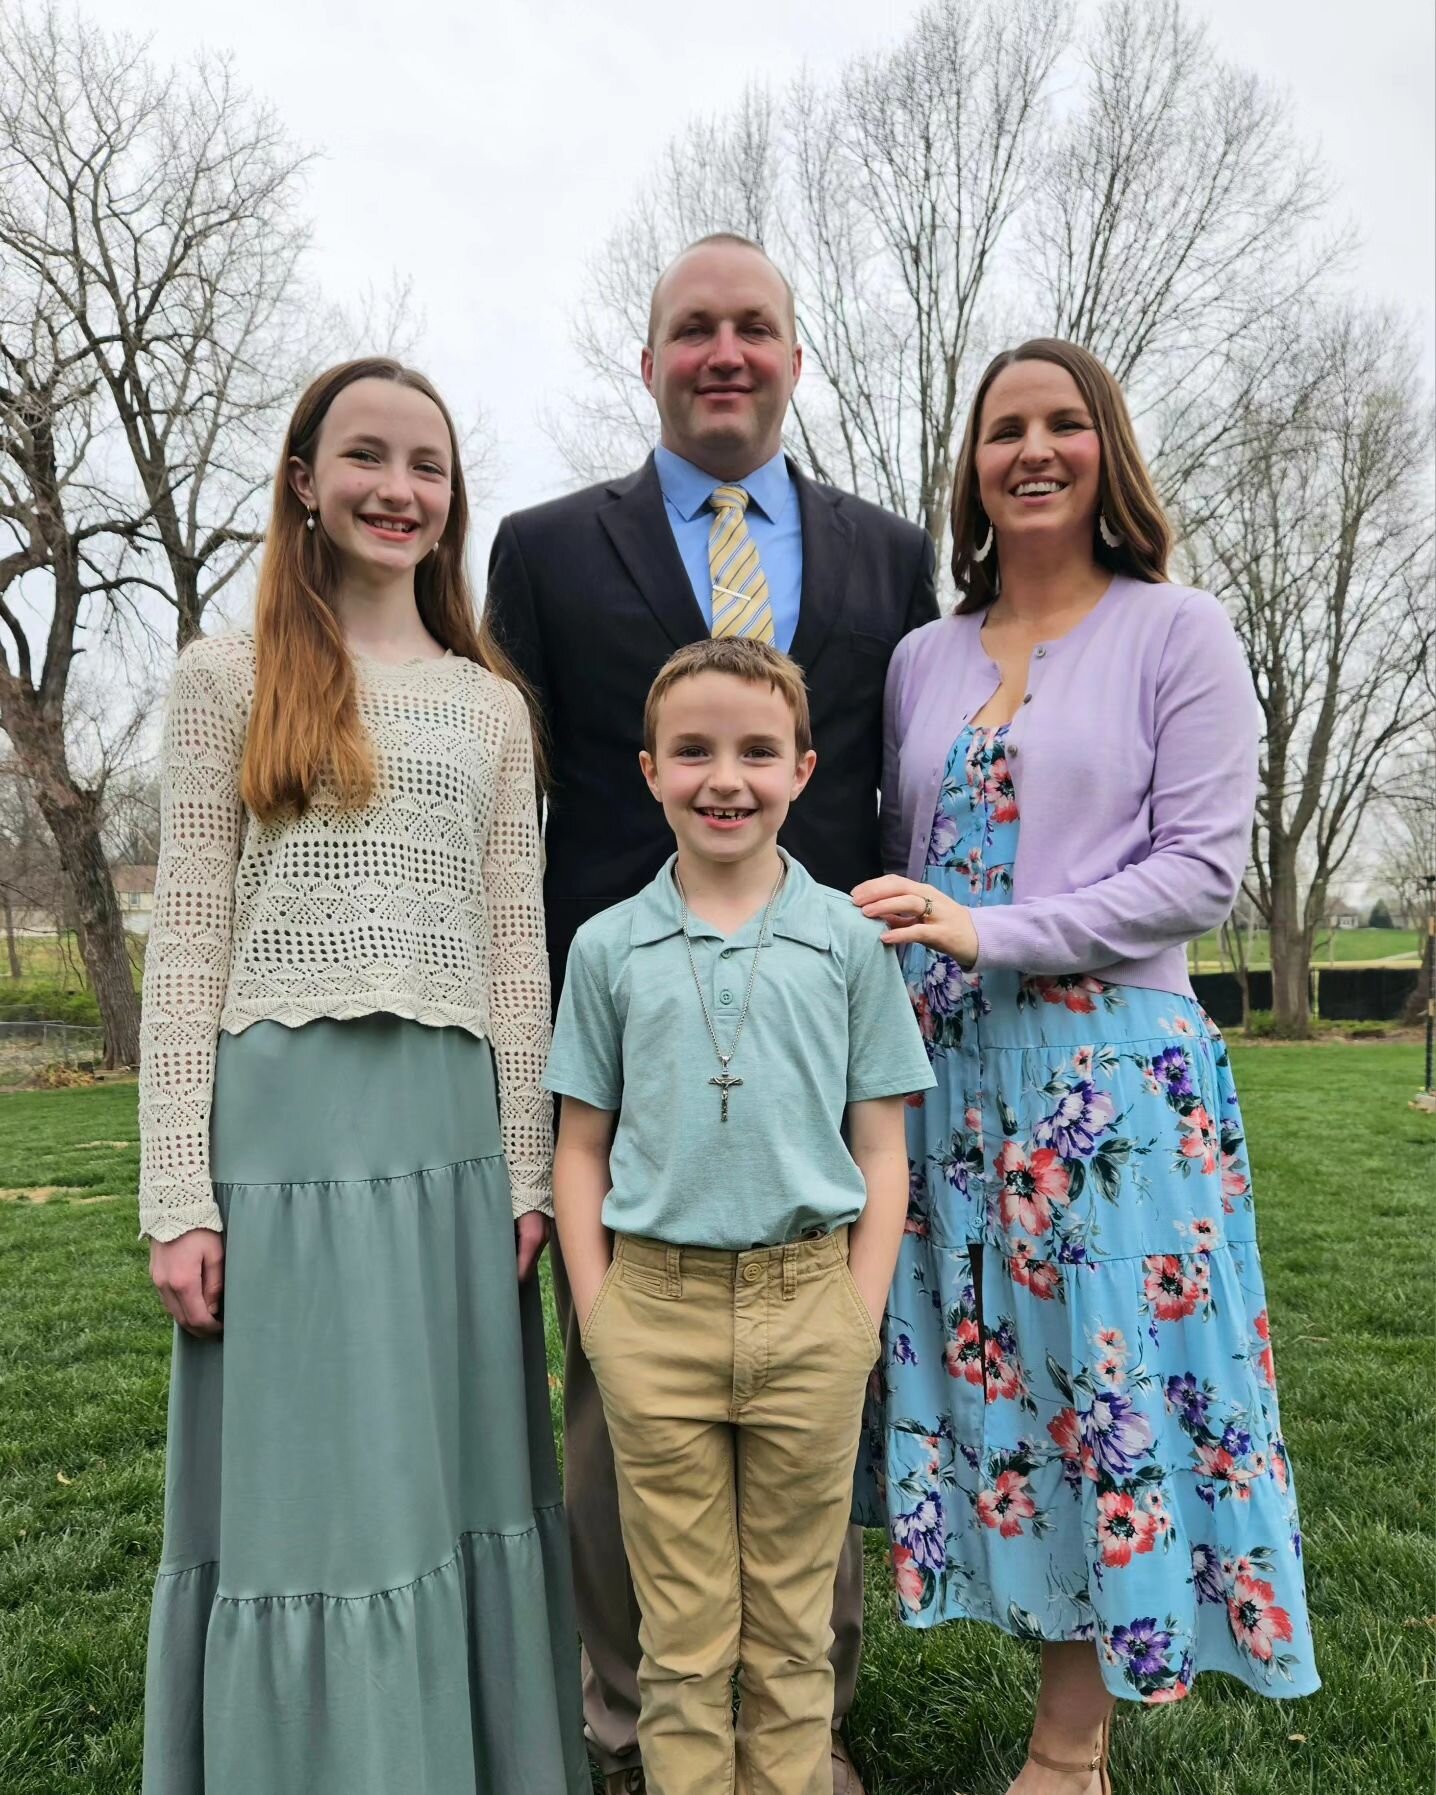 Easter blessings from our family to yours ✝️🙏💚